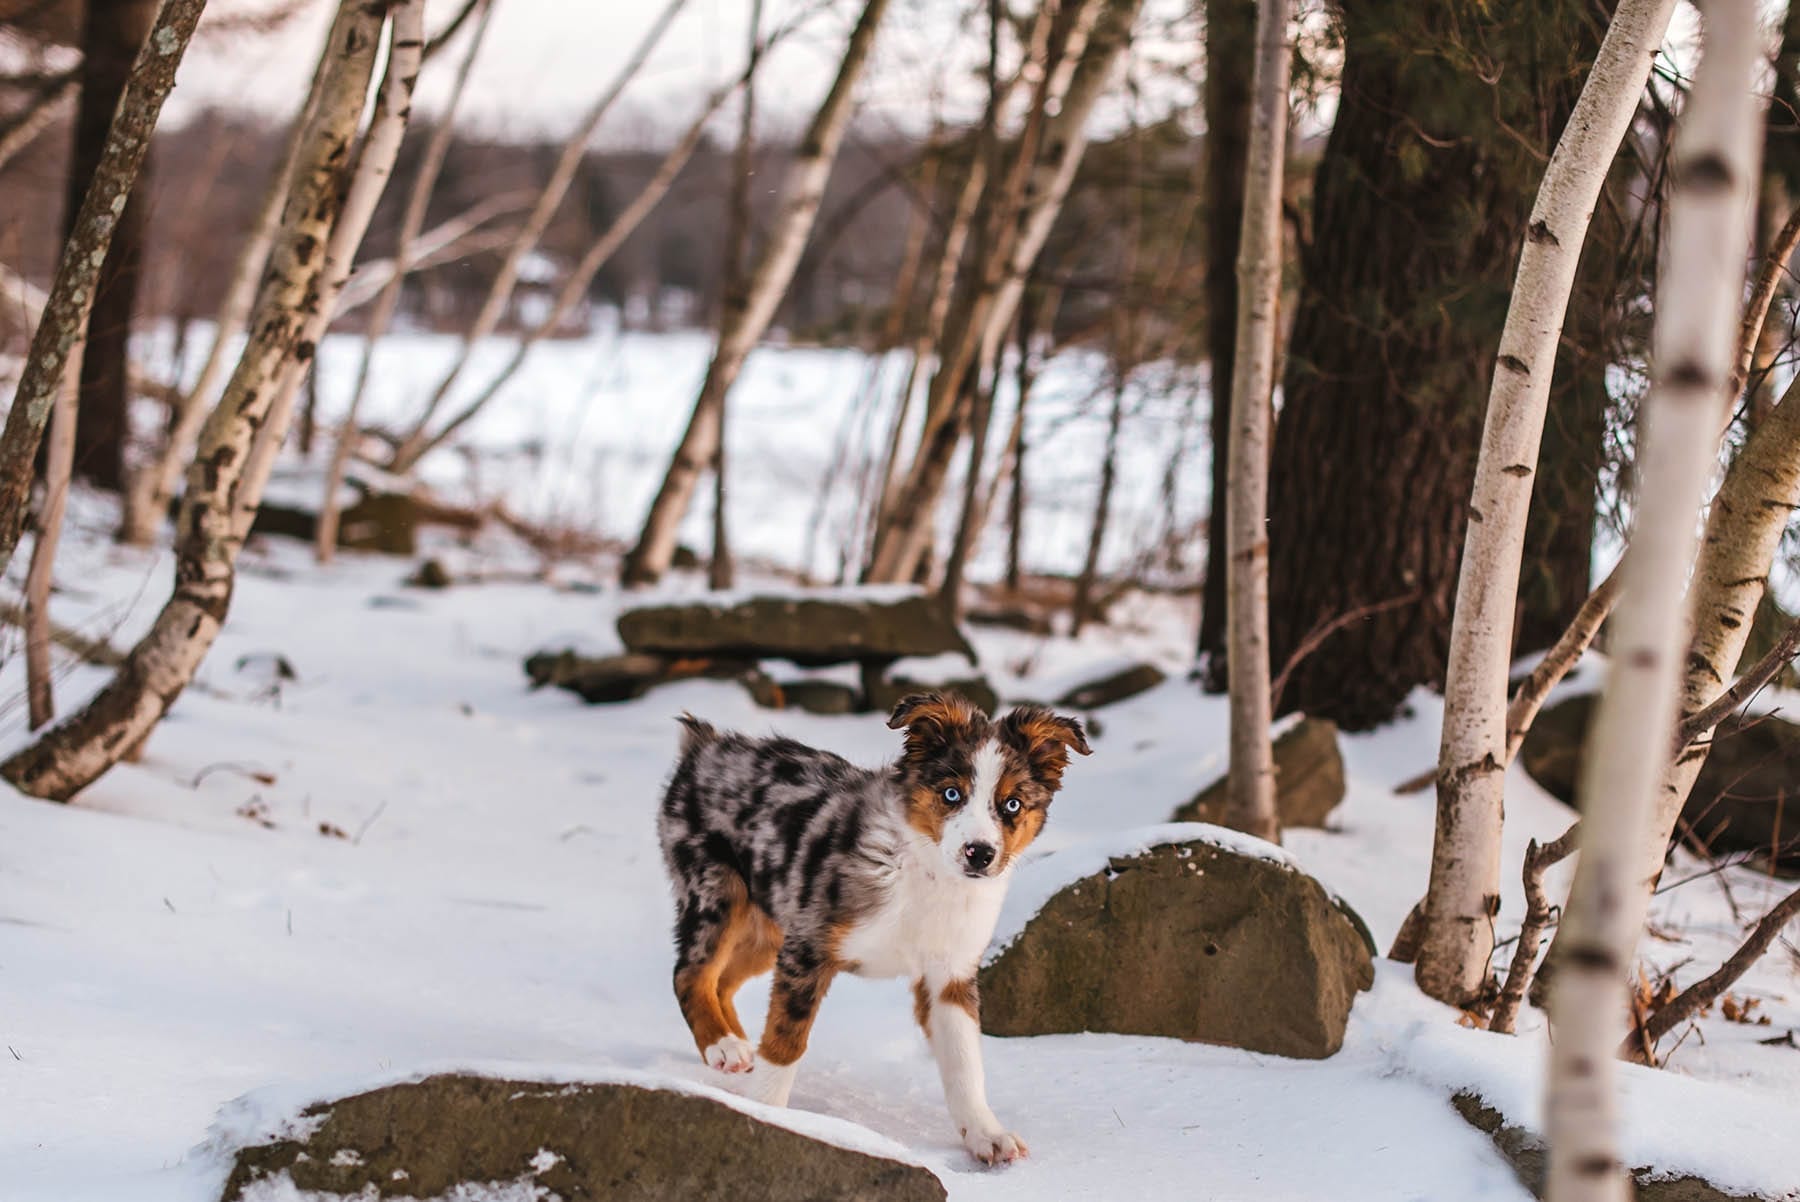 Australian Shepard puppy in the snow with birch trees